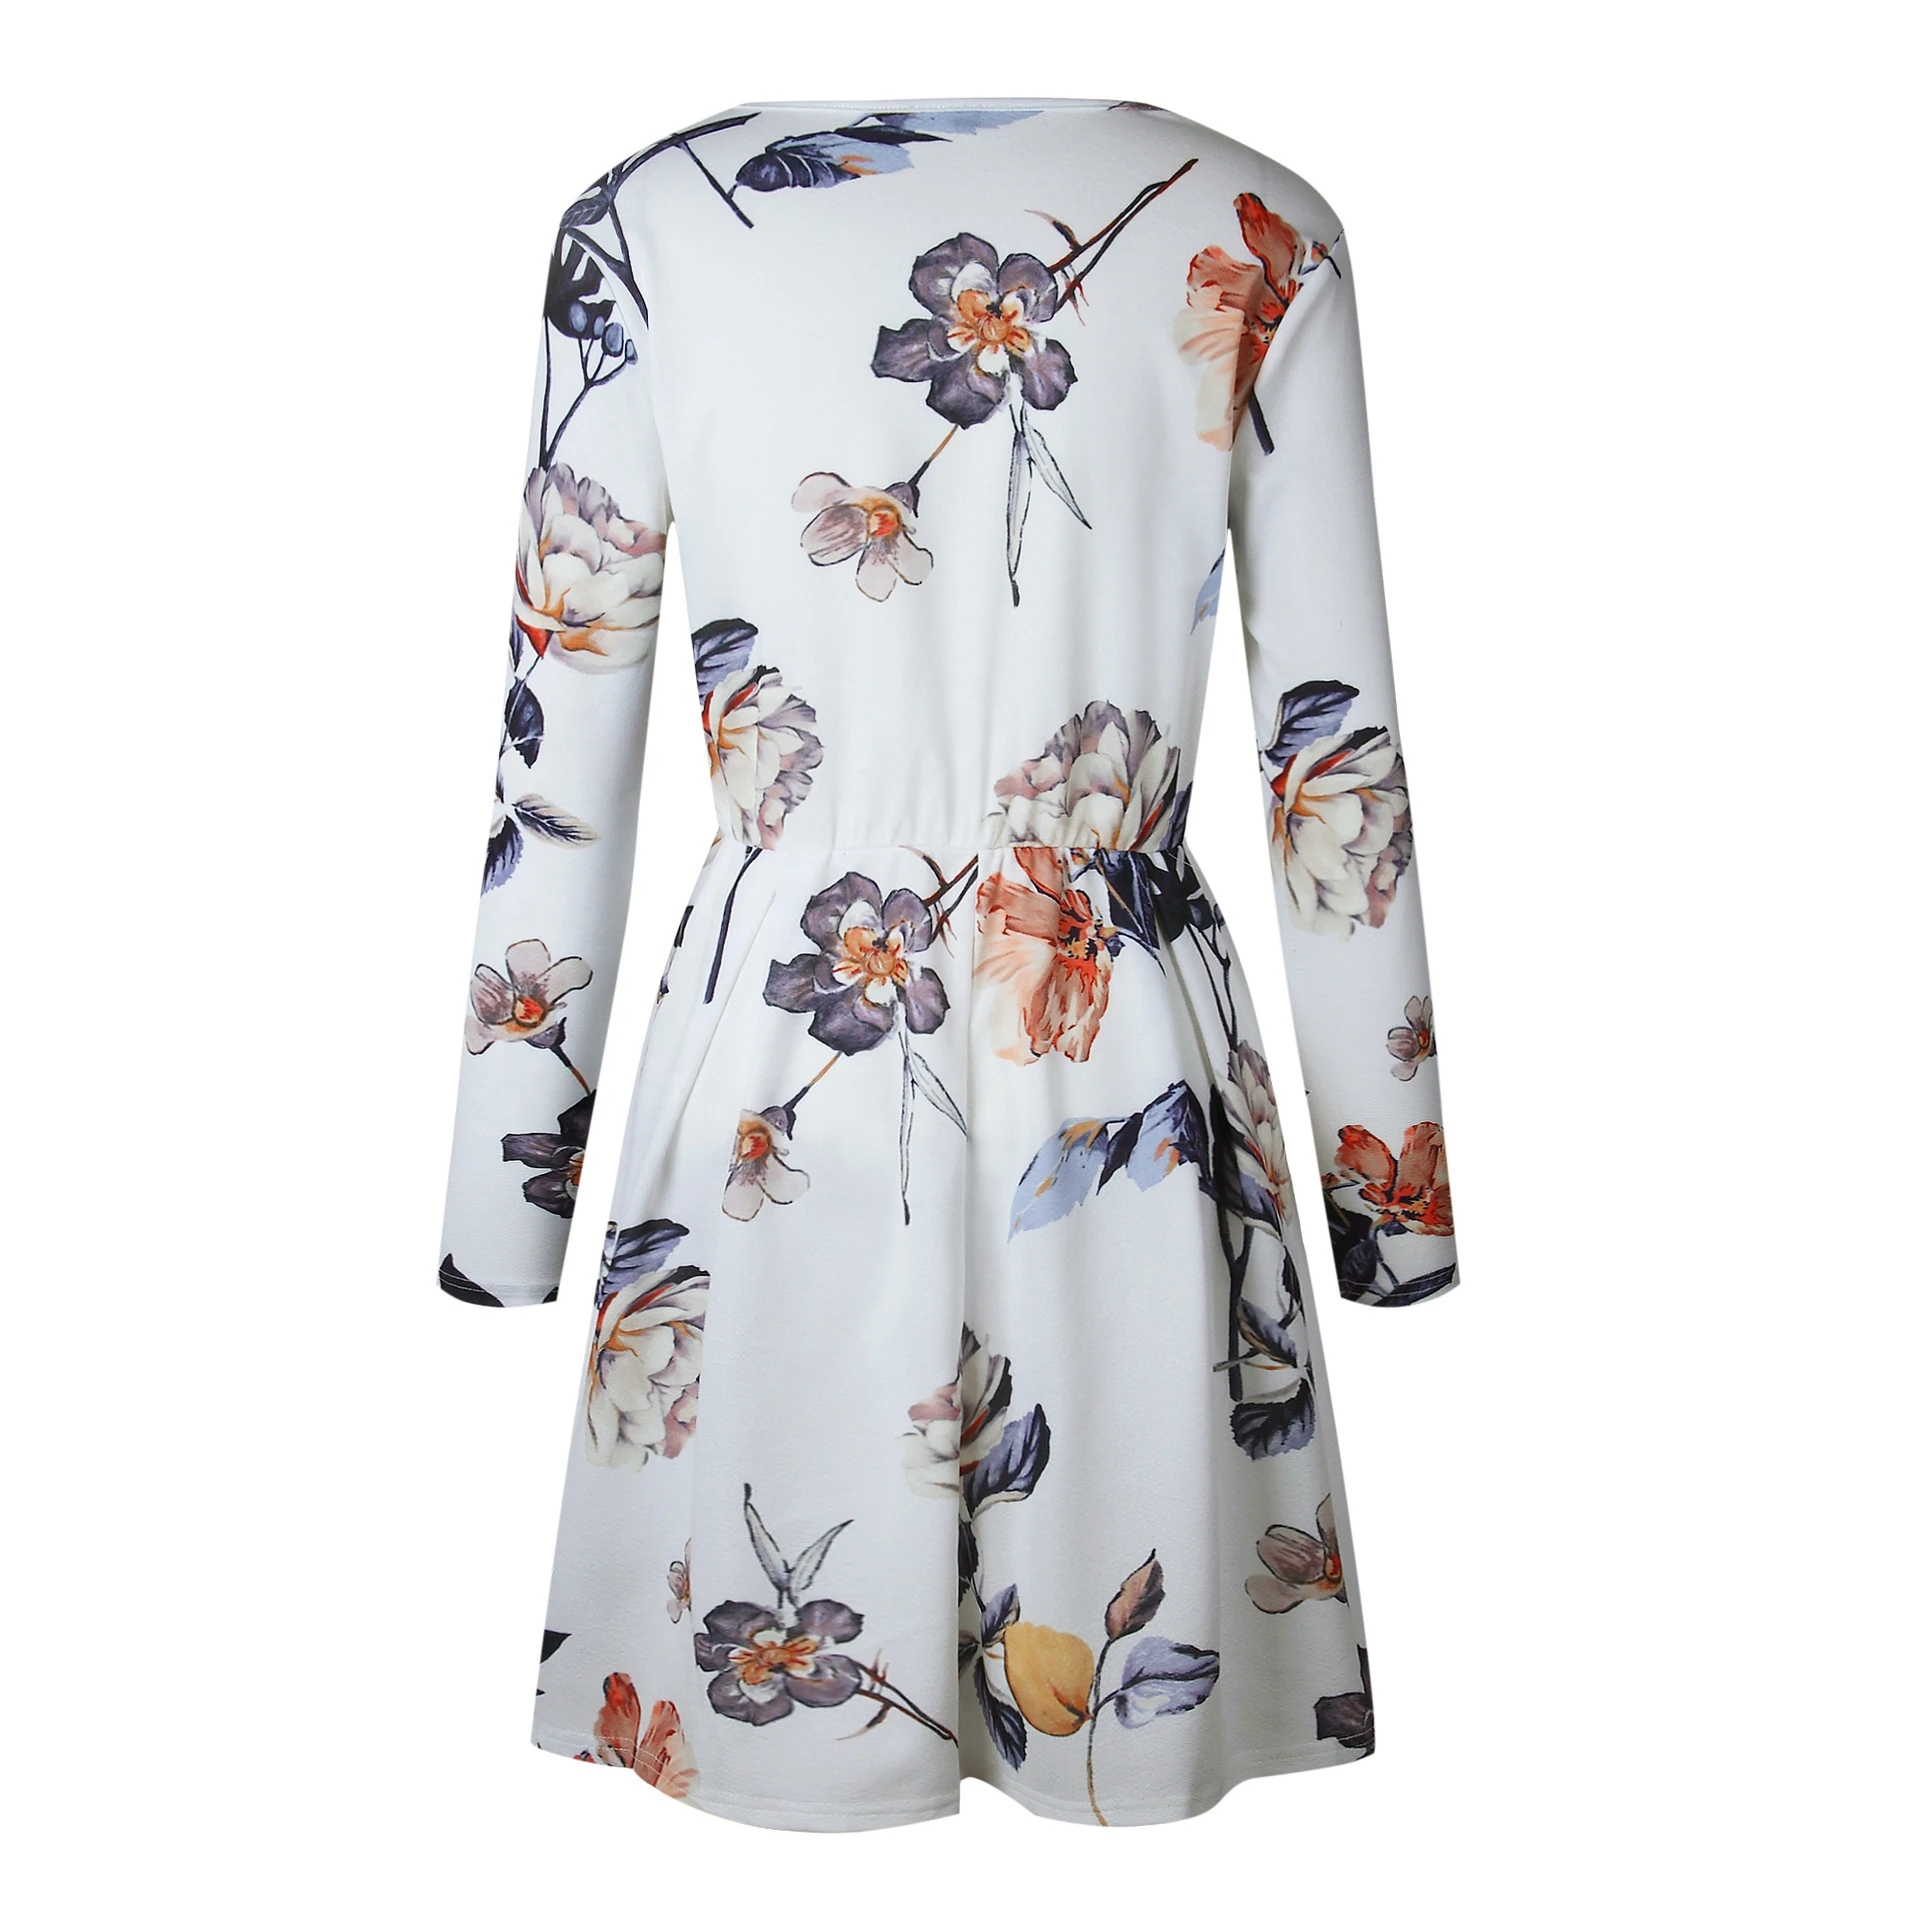 Floral Print Ladies Casual Dress Long Sleeve Women Dress For Party